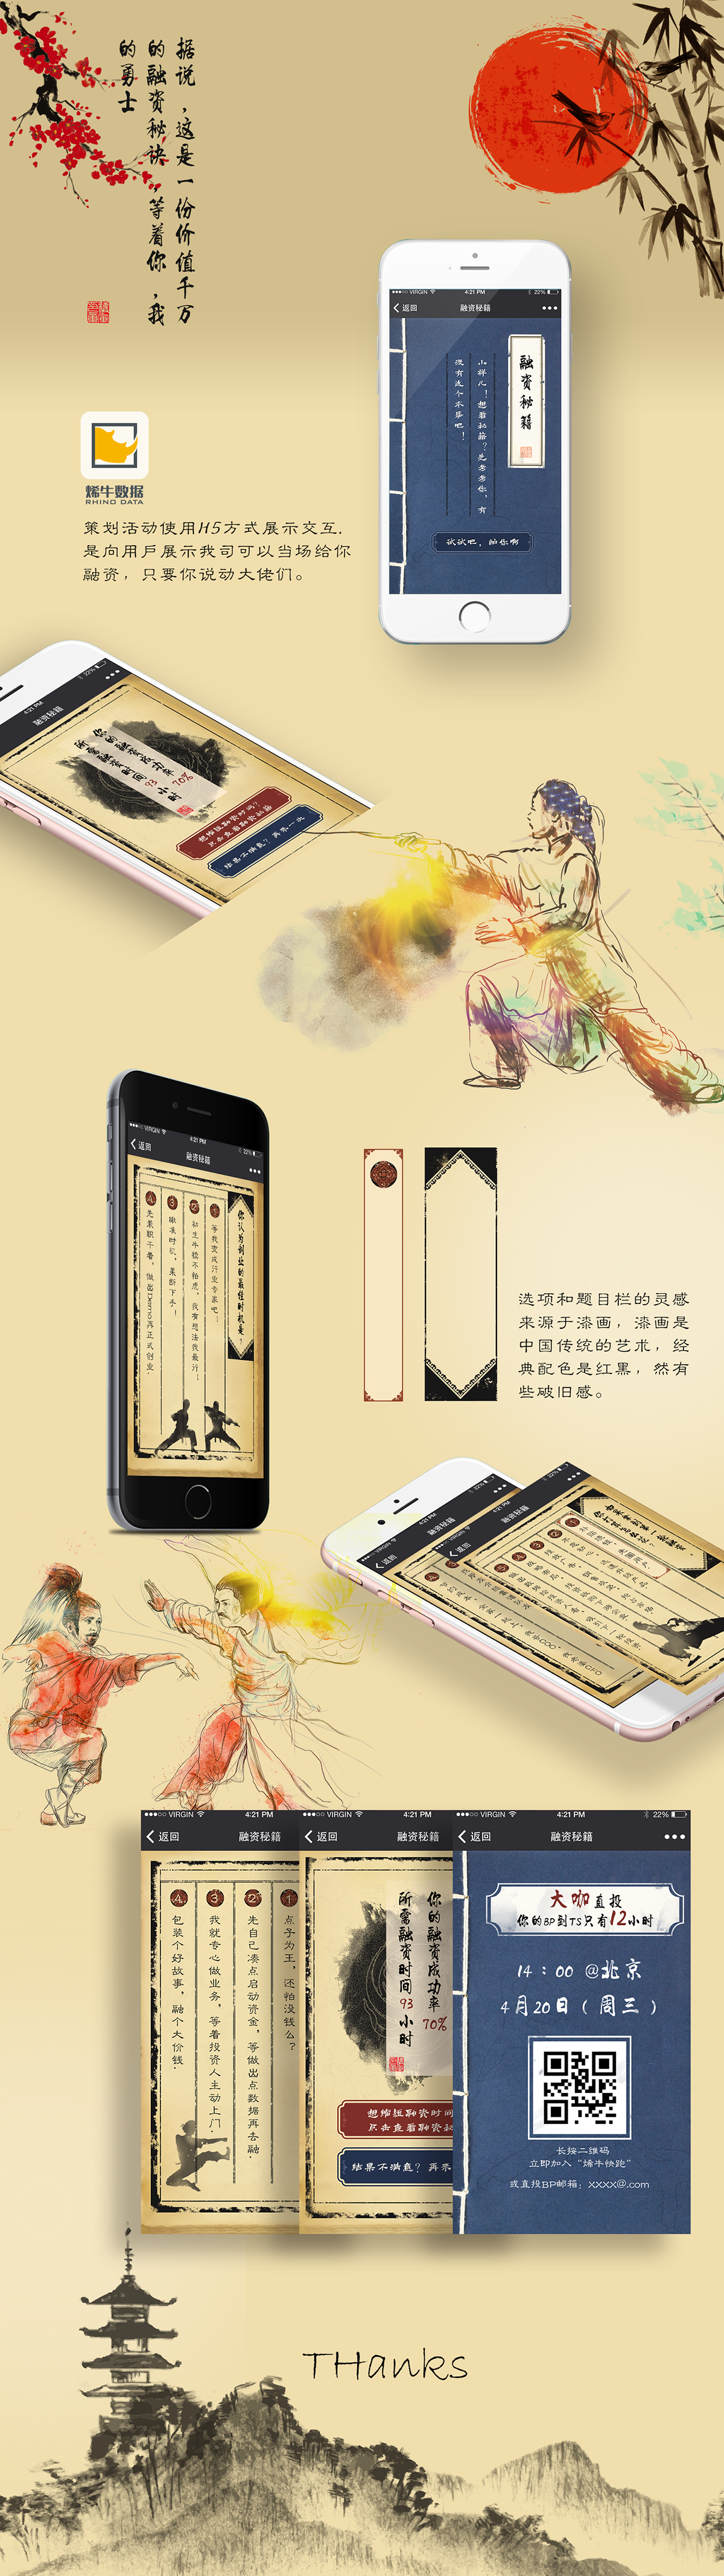 H5 finance interface design Chinese style